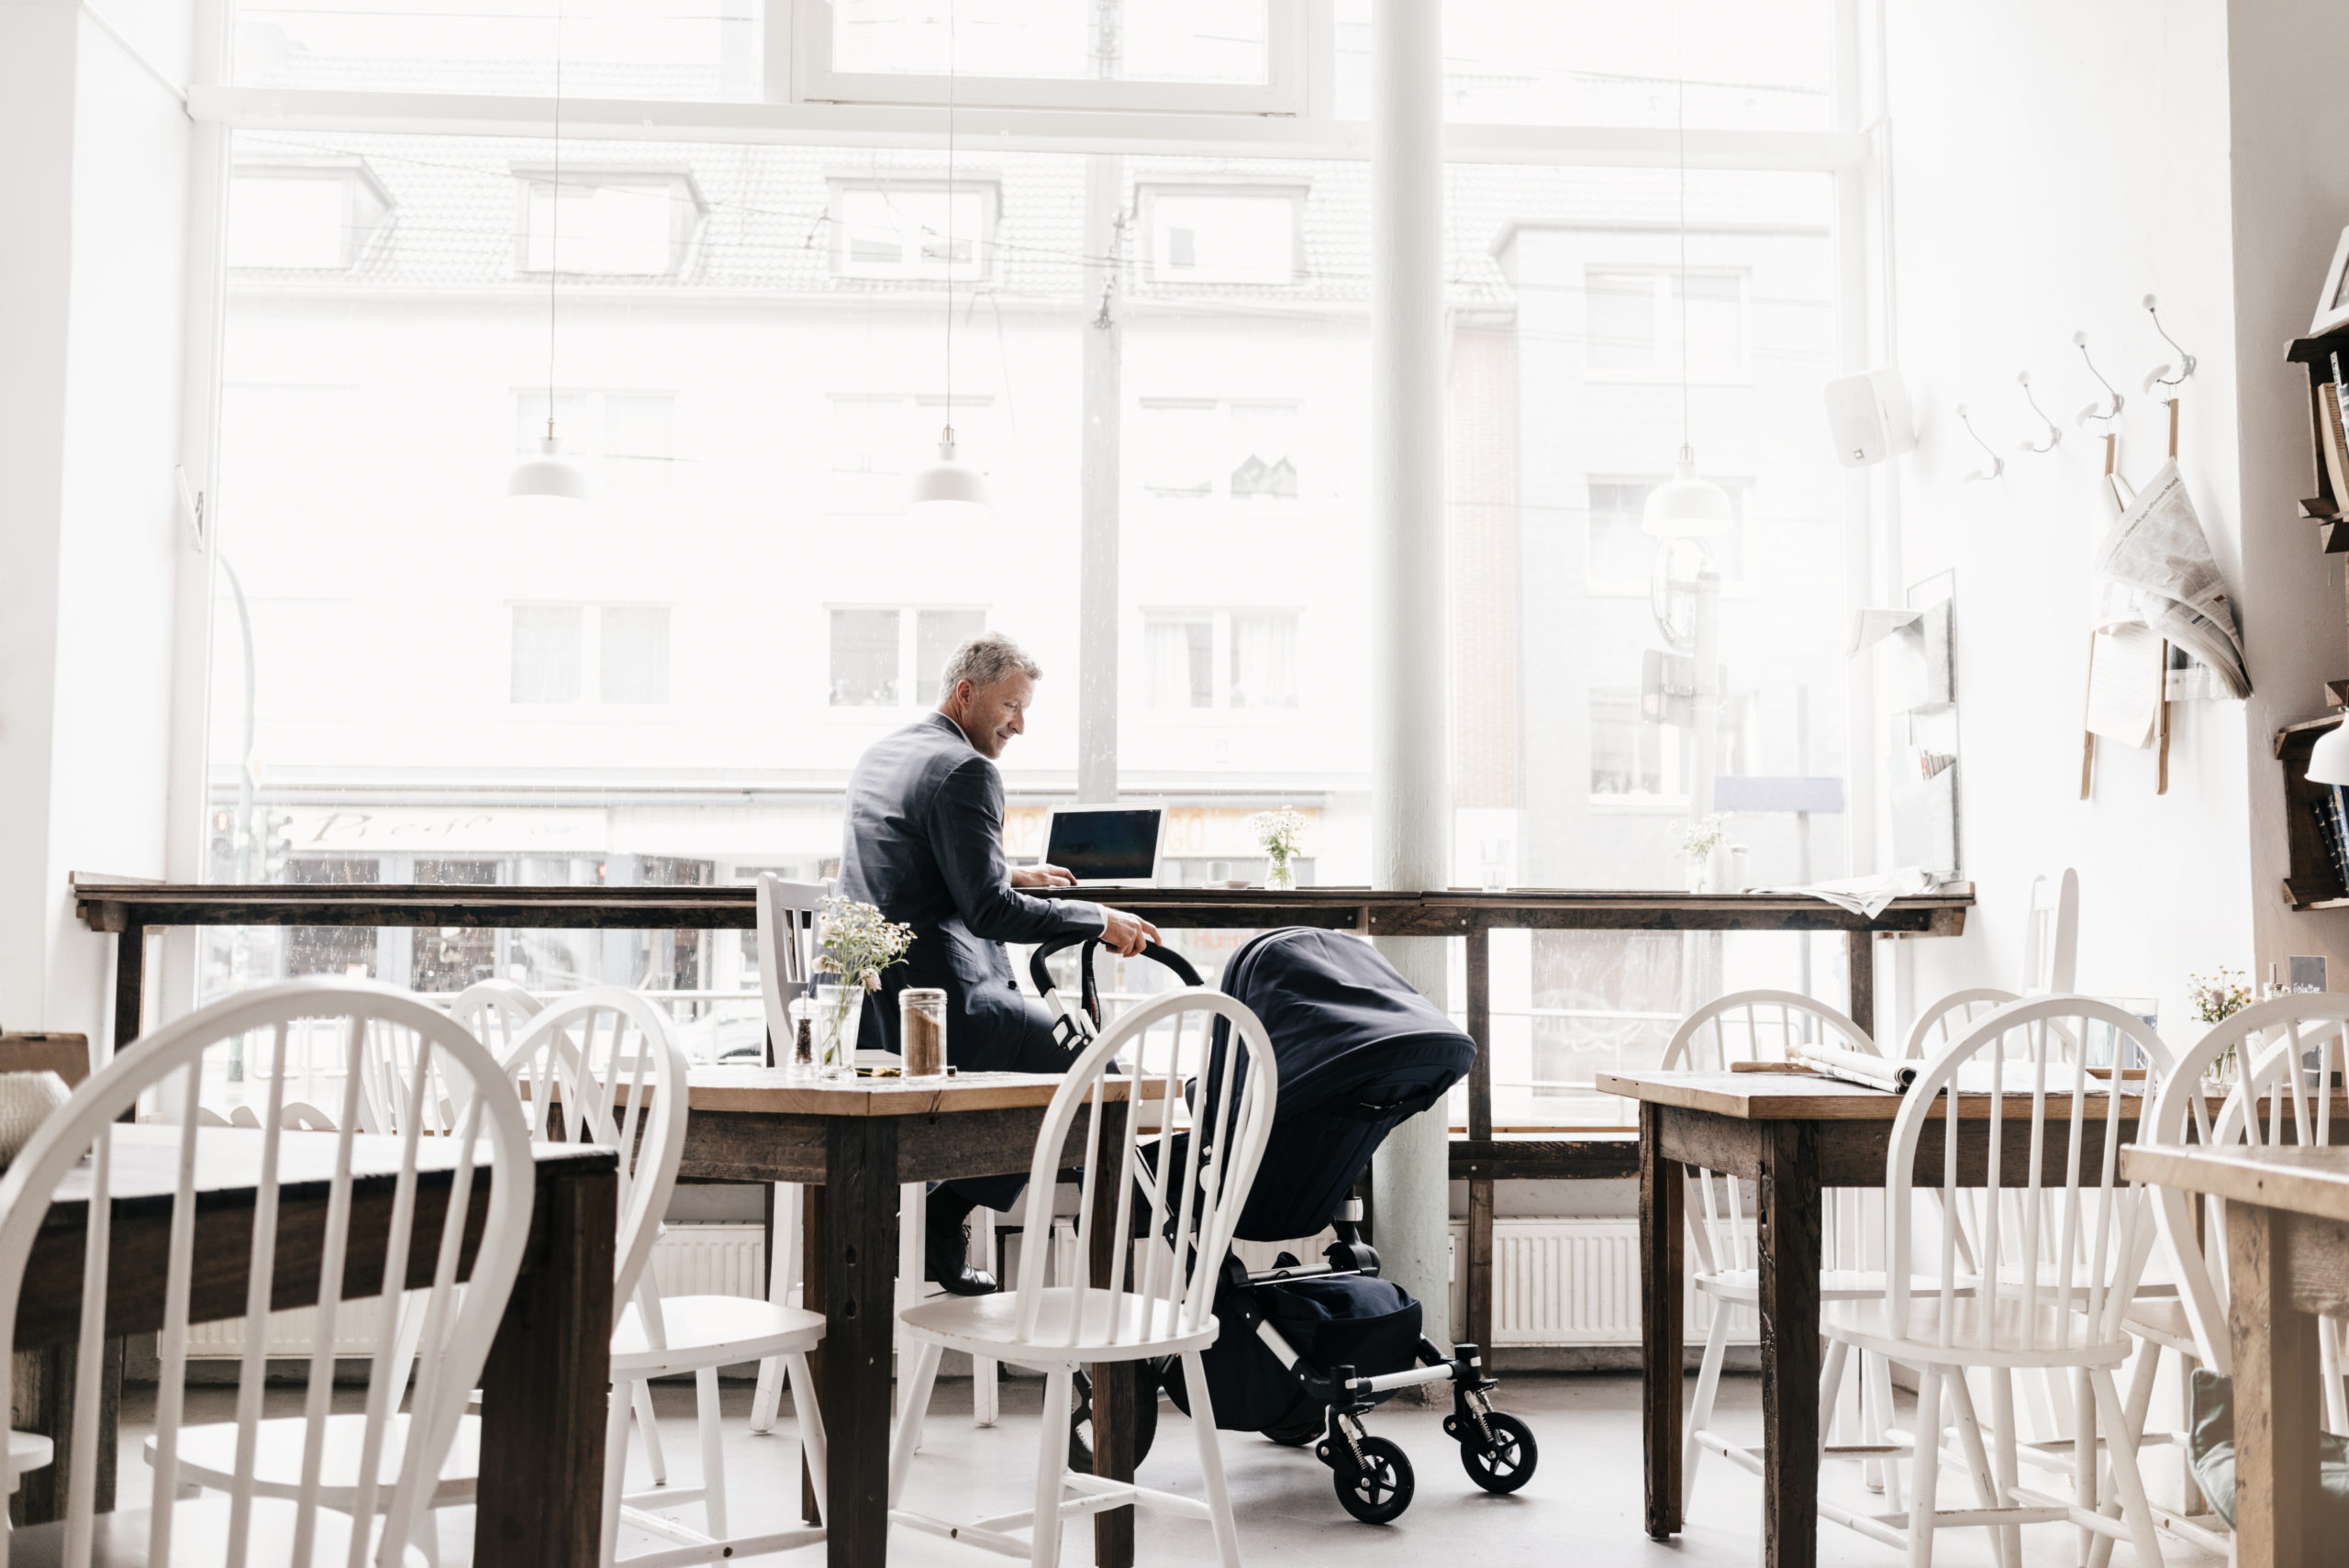 image of man and baby stroller in empty coffee shop